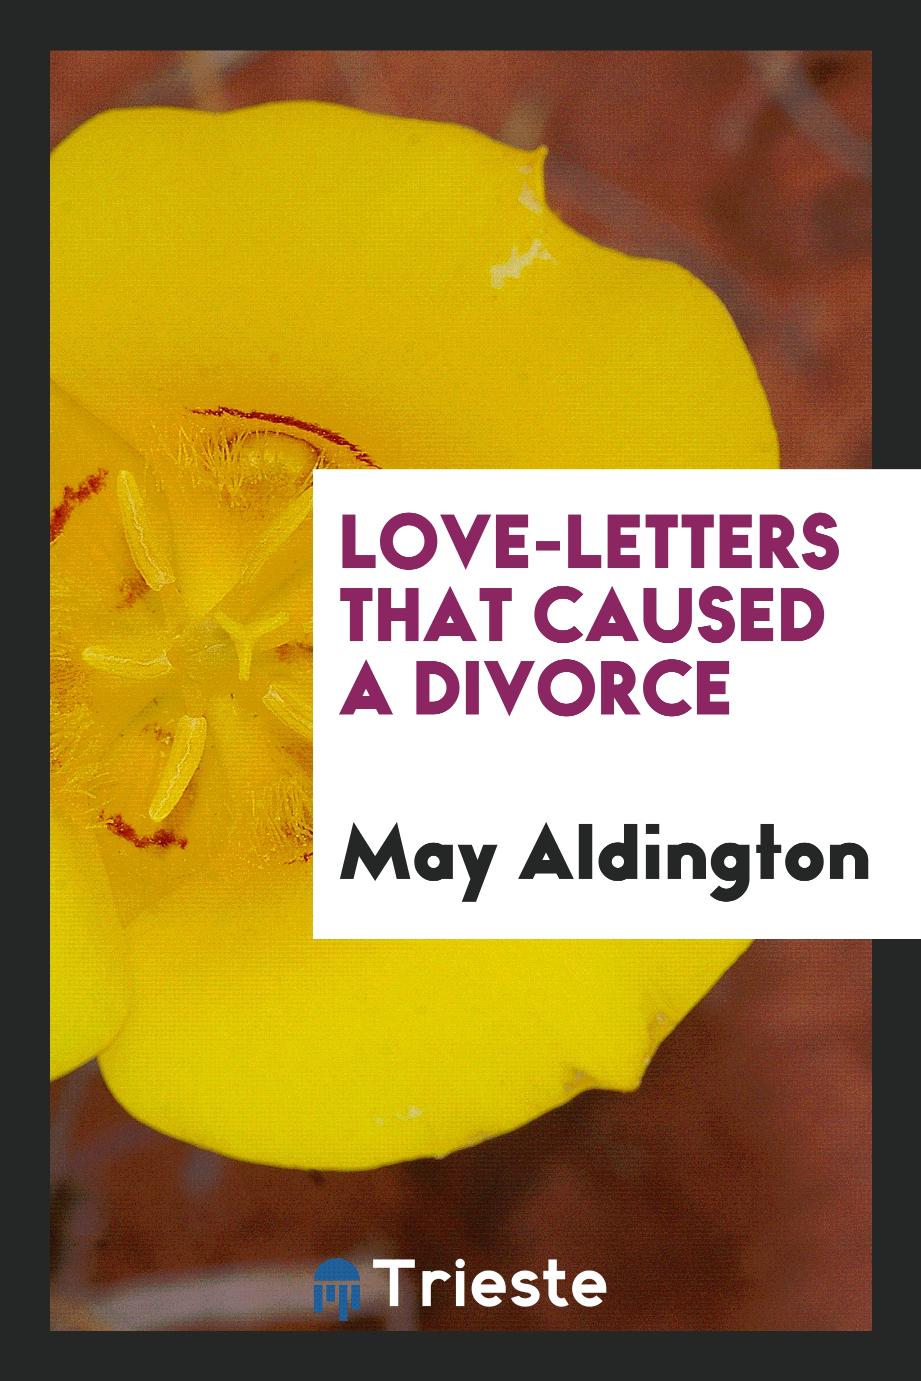 Love-Letters that Caused a Divorce